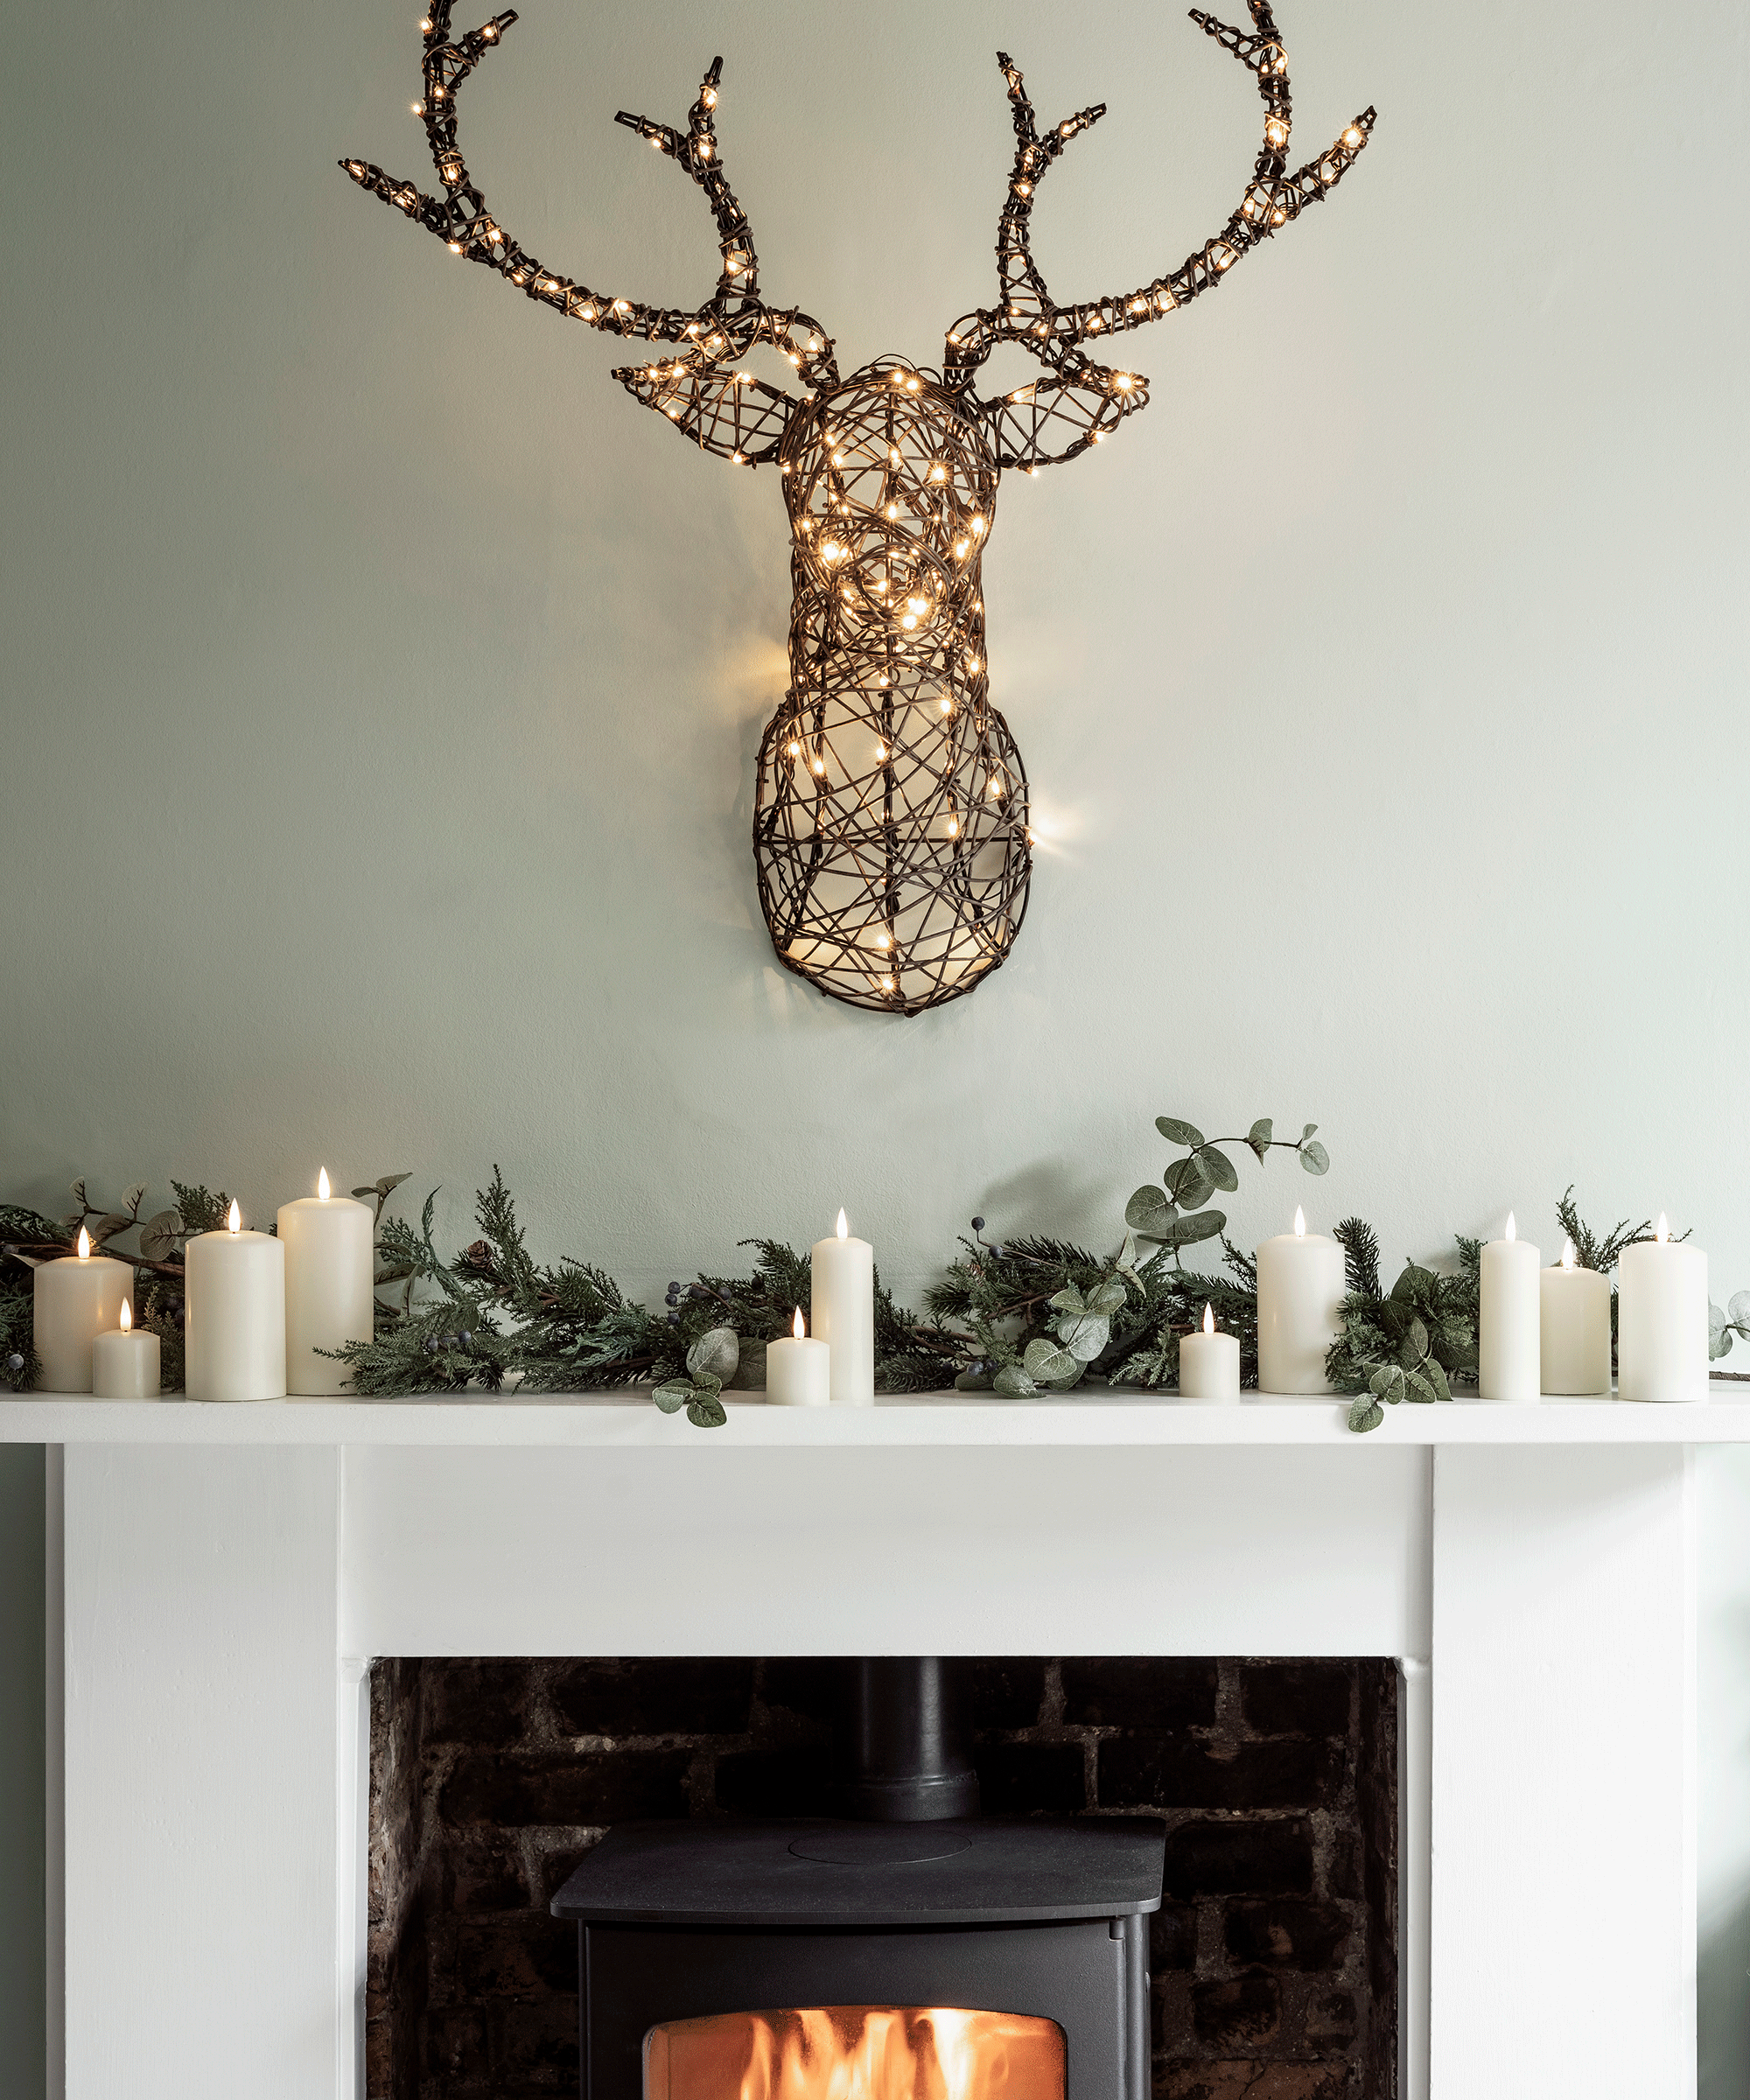 Warm White Rattan Illuminated Christmas Stag's Head above a woodburning stove and white fireplace